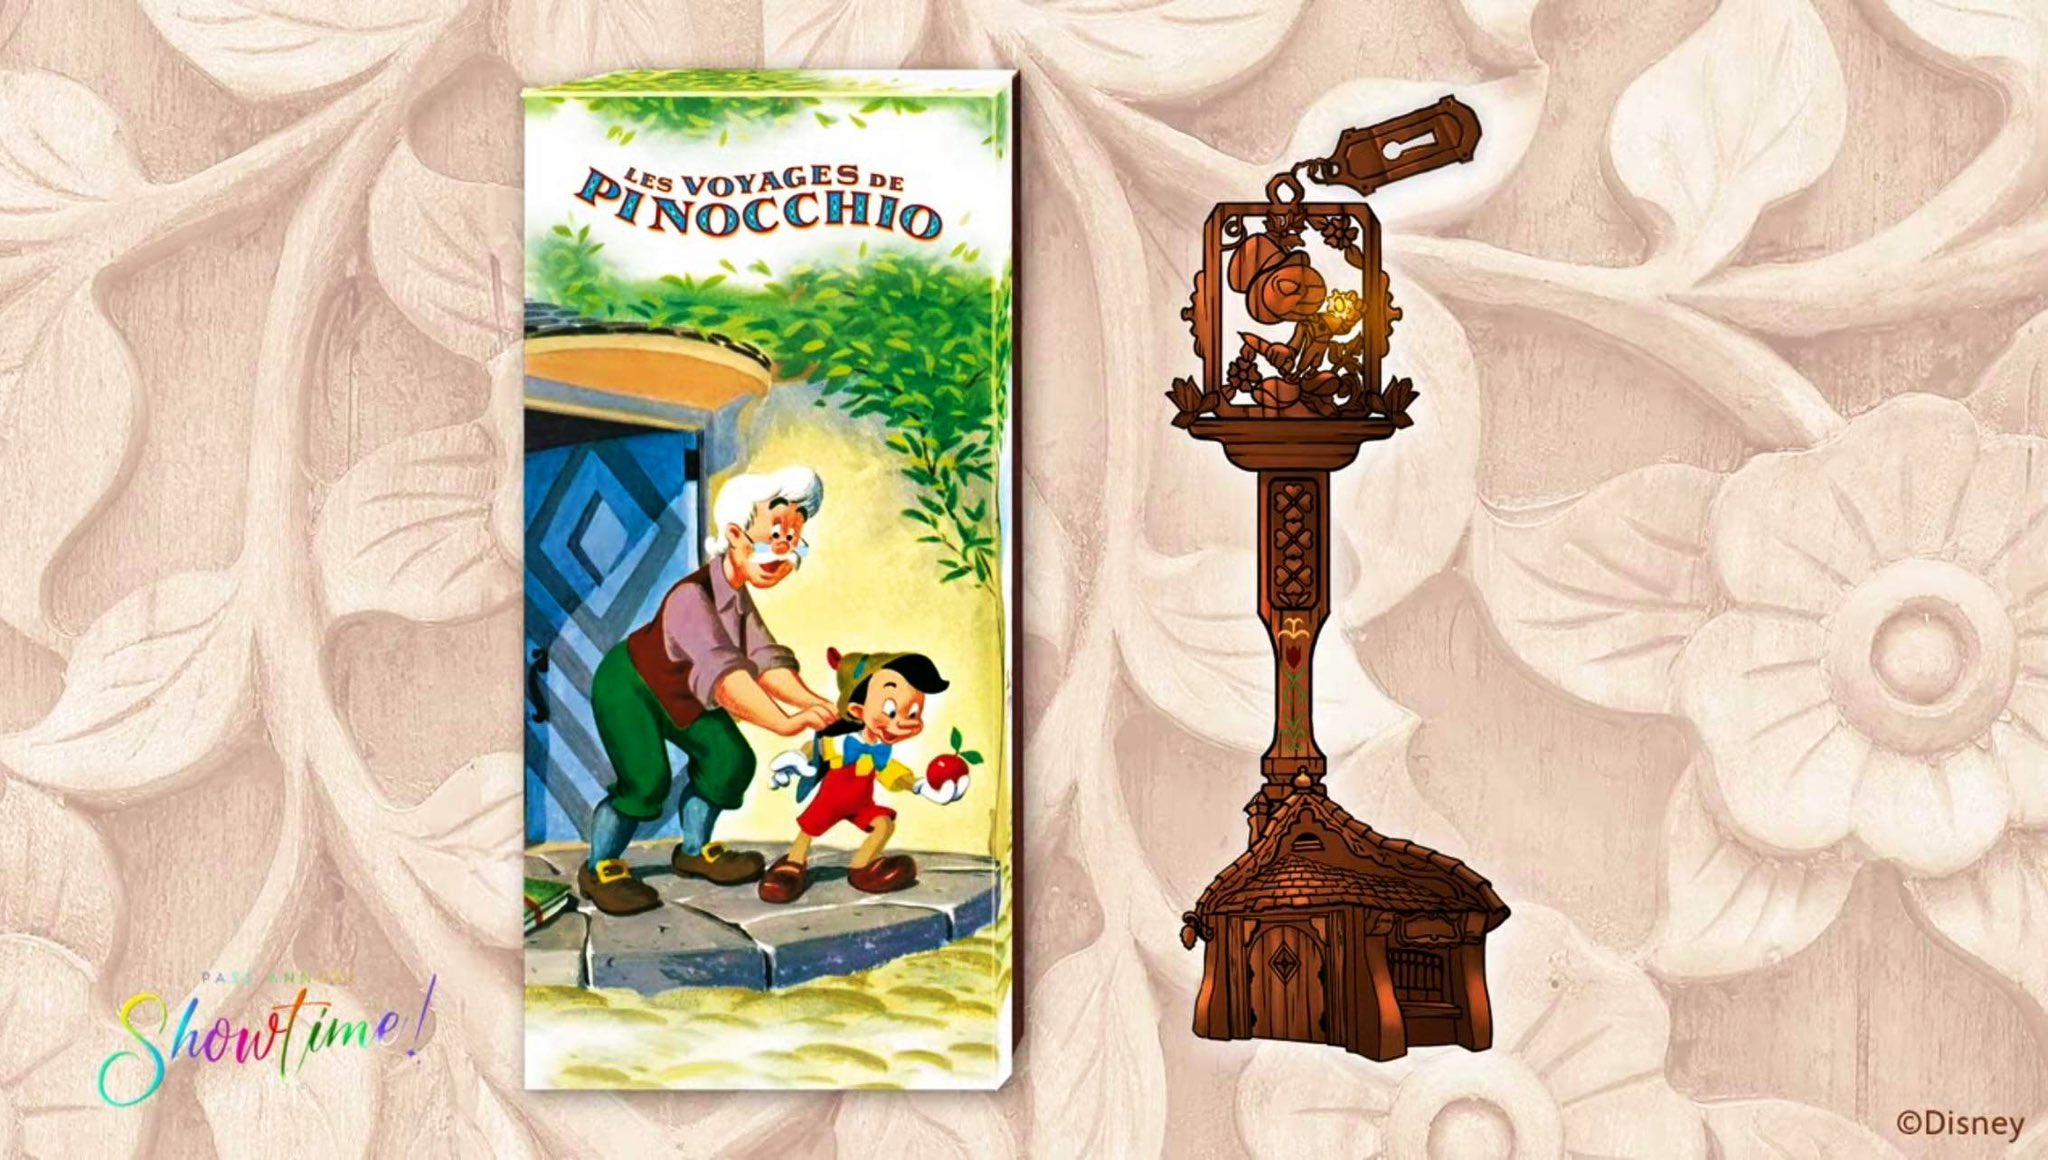 Disneyland Paris share images of Autopia and Pinocchio Collectible Keys